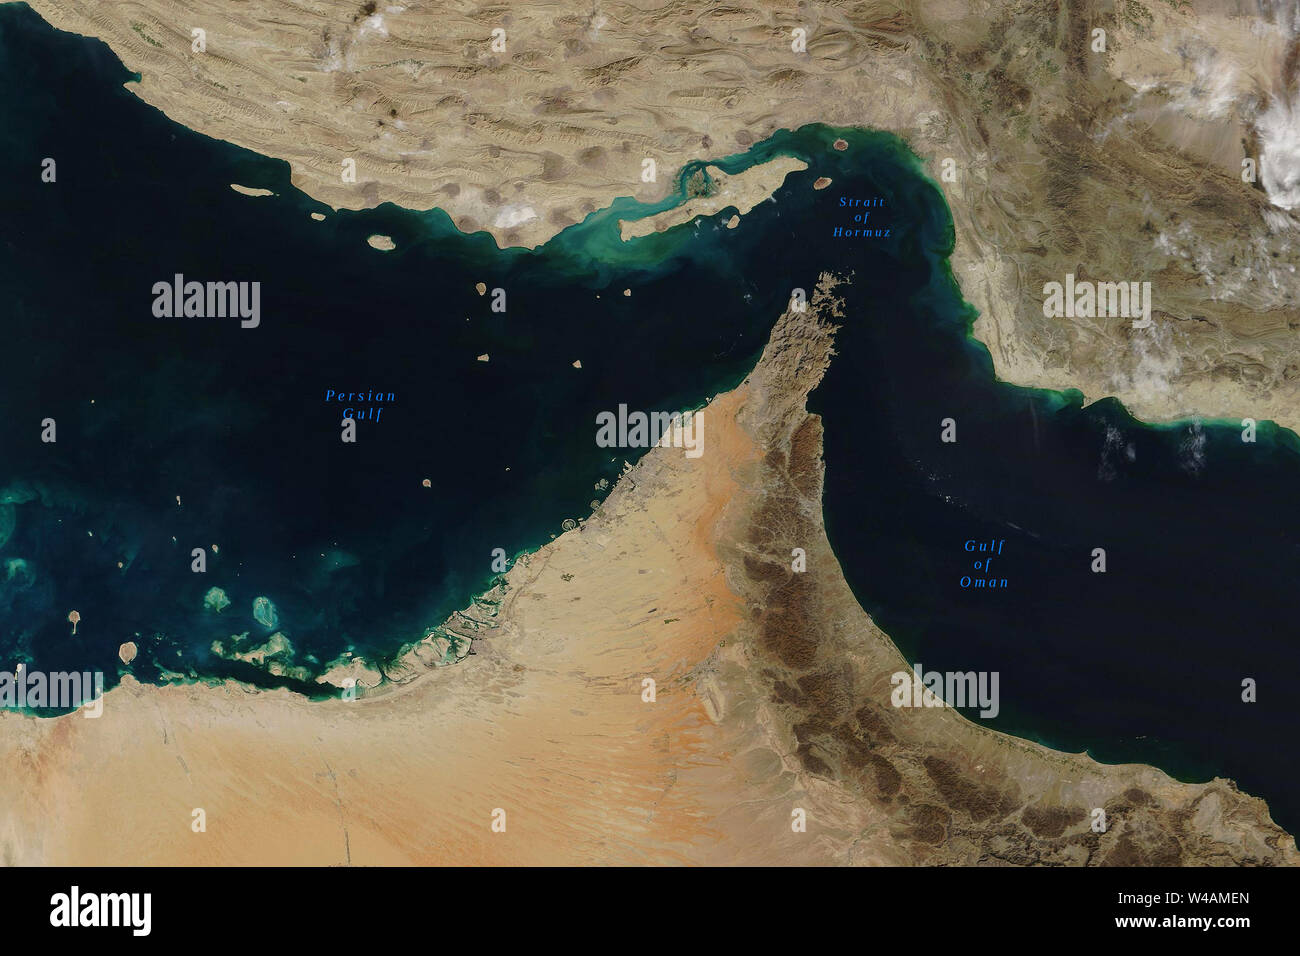 Strait of Hormuz, a strait between the Persian Gulf and the Gulf of Oman, seen from space - Elements of this image furnished by NASA Stock Photo